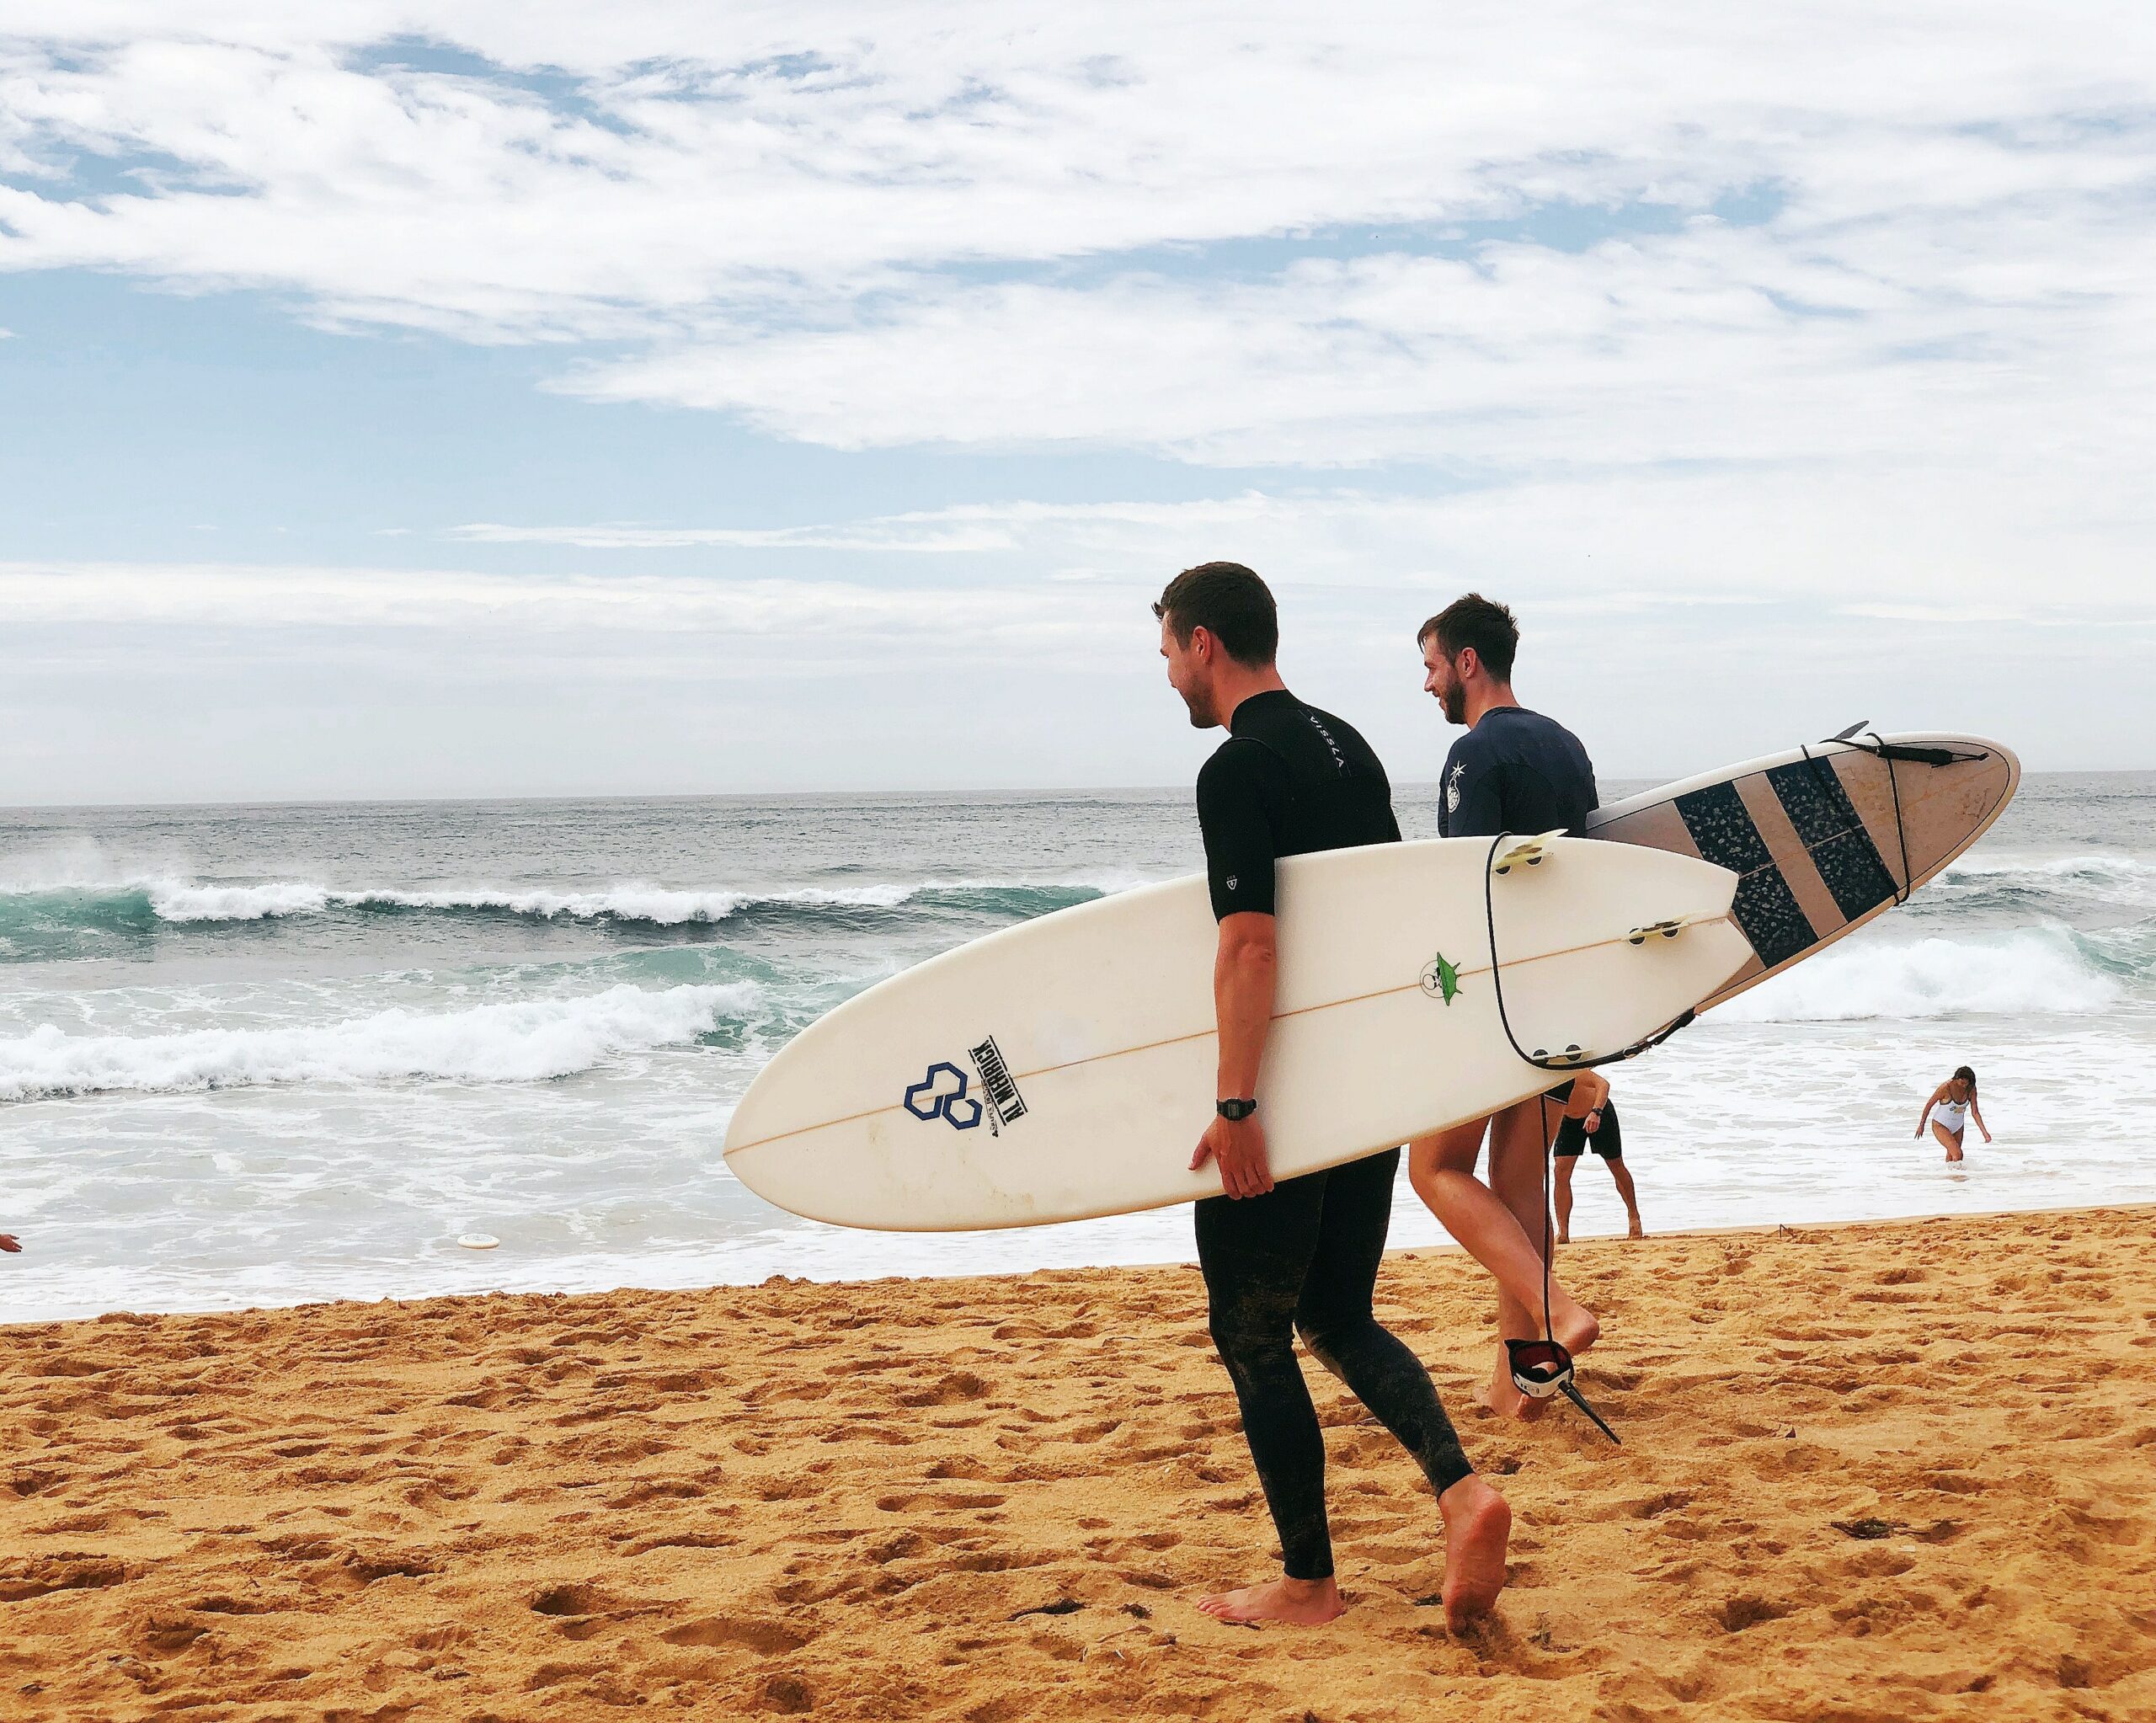 Best protective gear for surfers